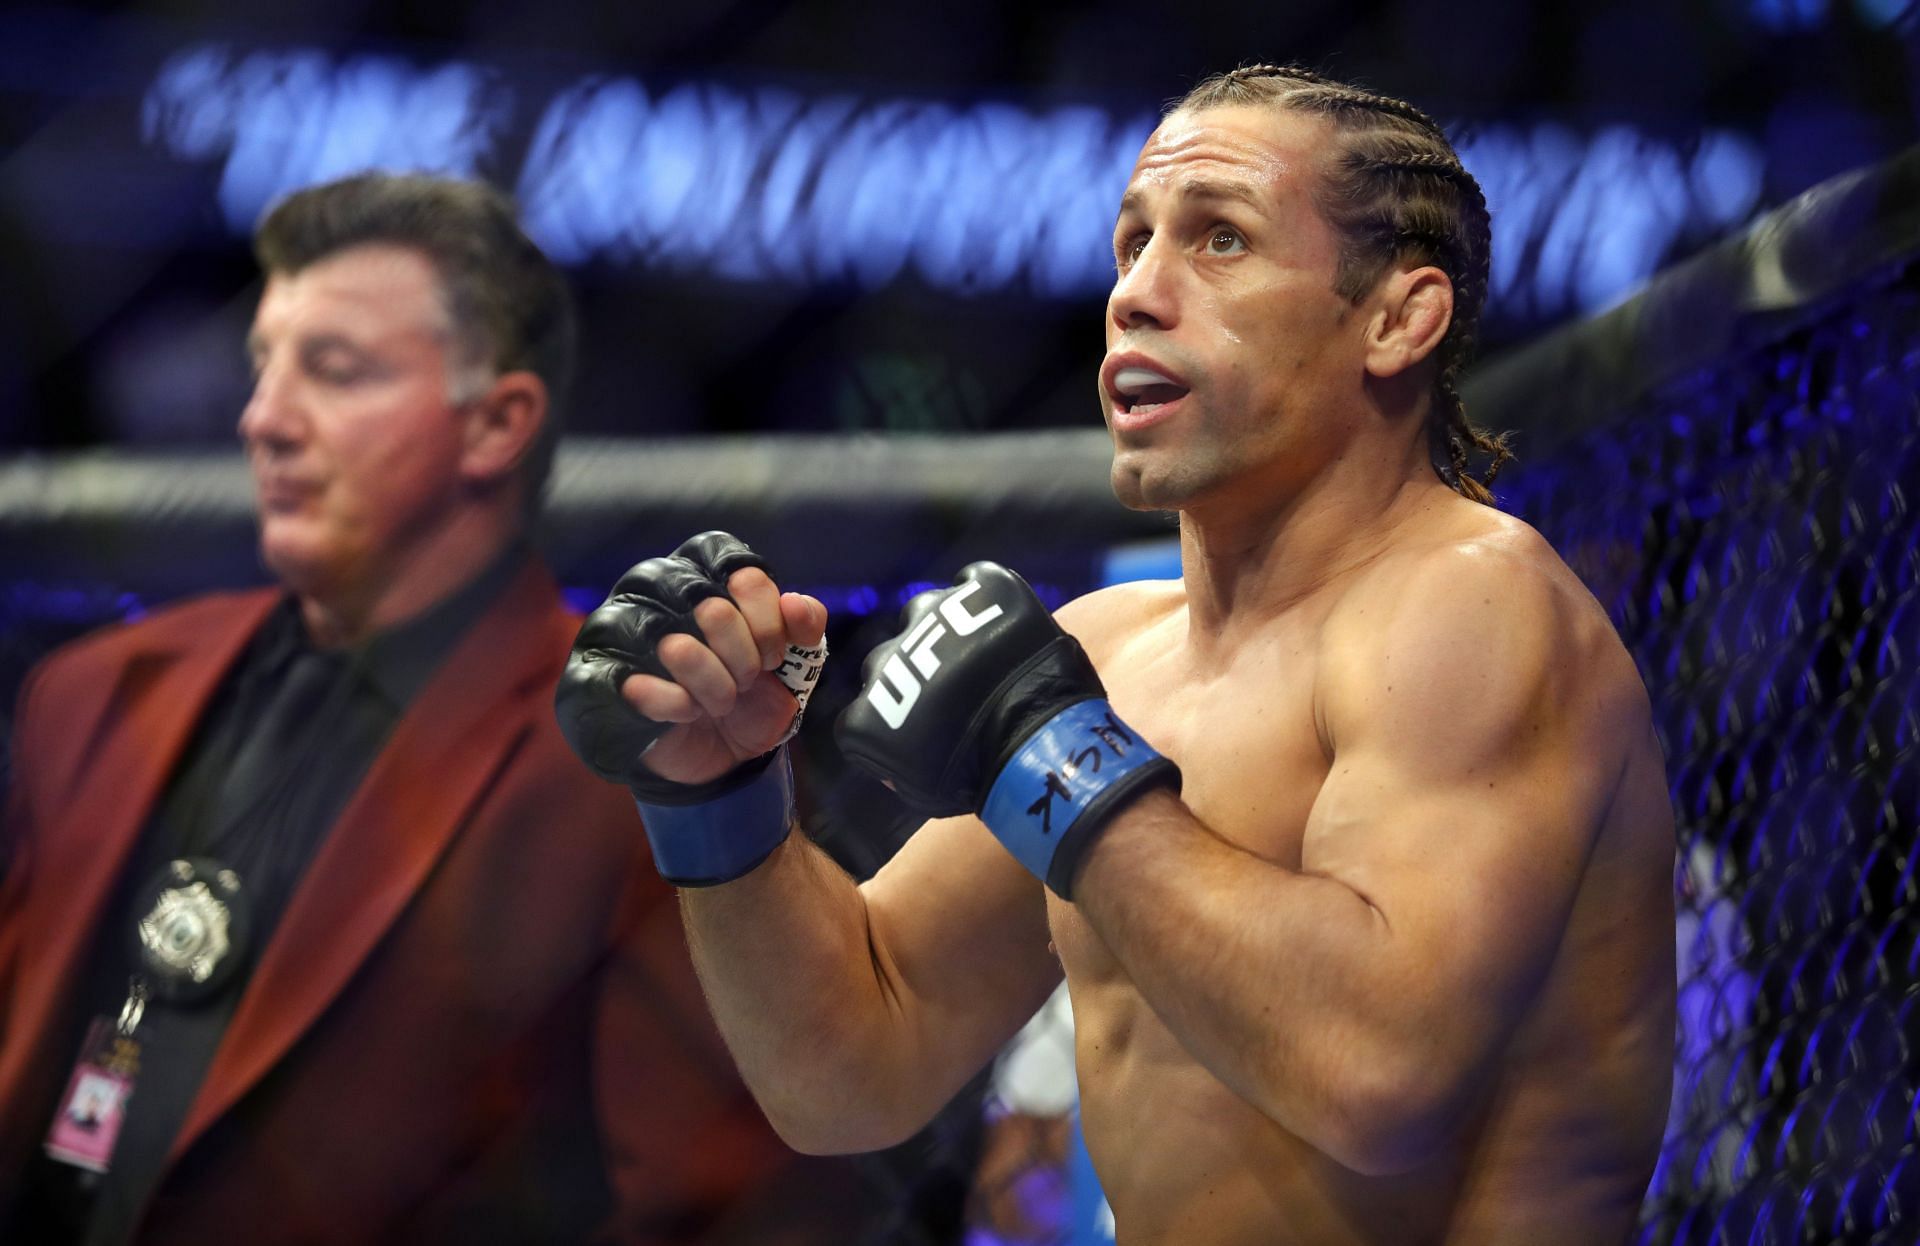 Urijah Faber challenged for gold in multiple promotions